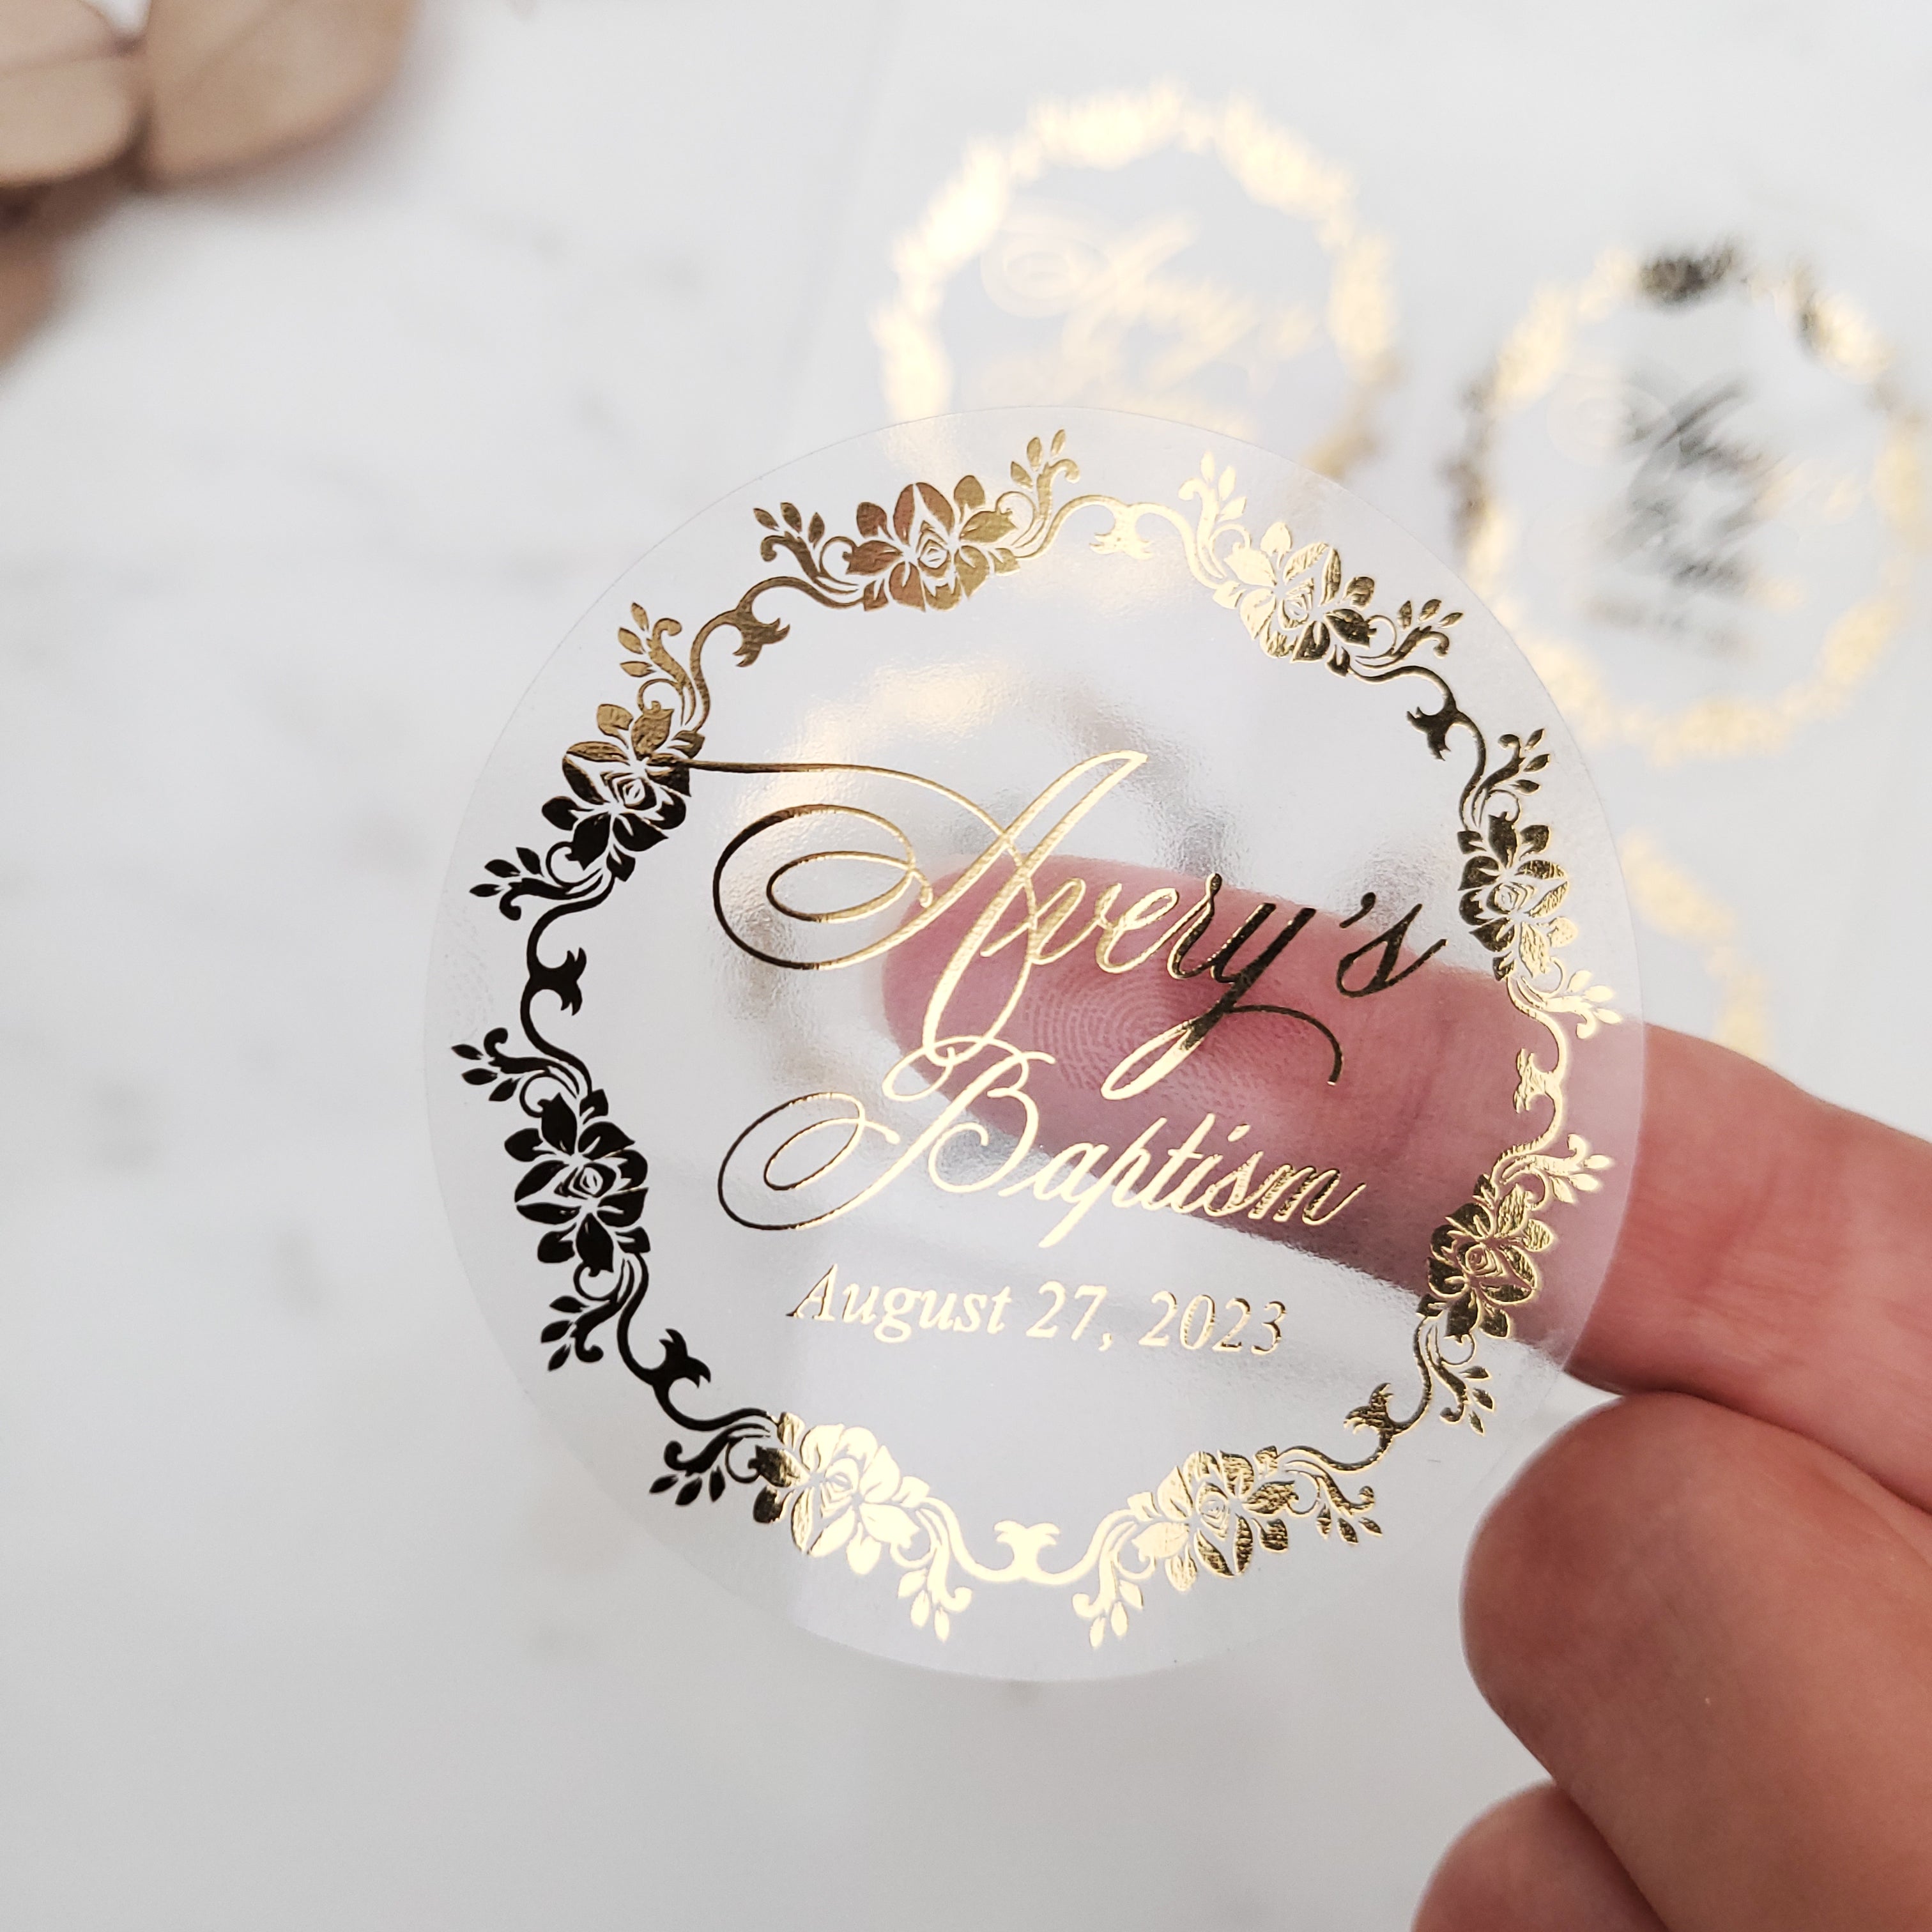 Custom Clear Stickers Personalized Circle Labels Stickers Custom Business  Logo Metallic Gold Stickers for Wedding Favor Party Baptism